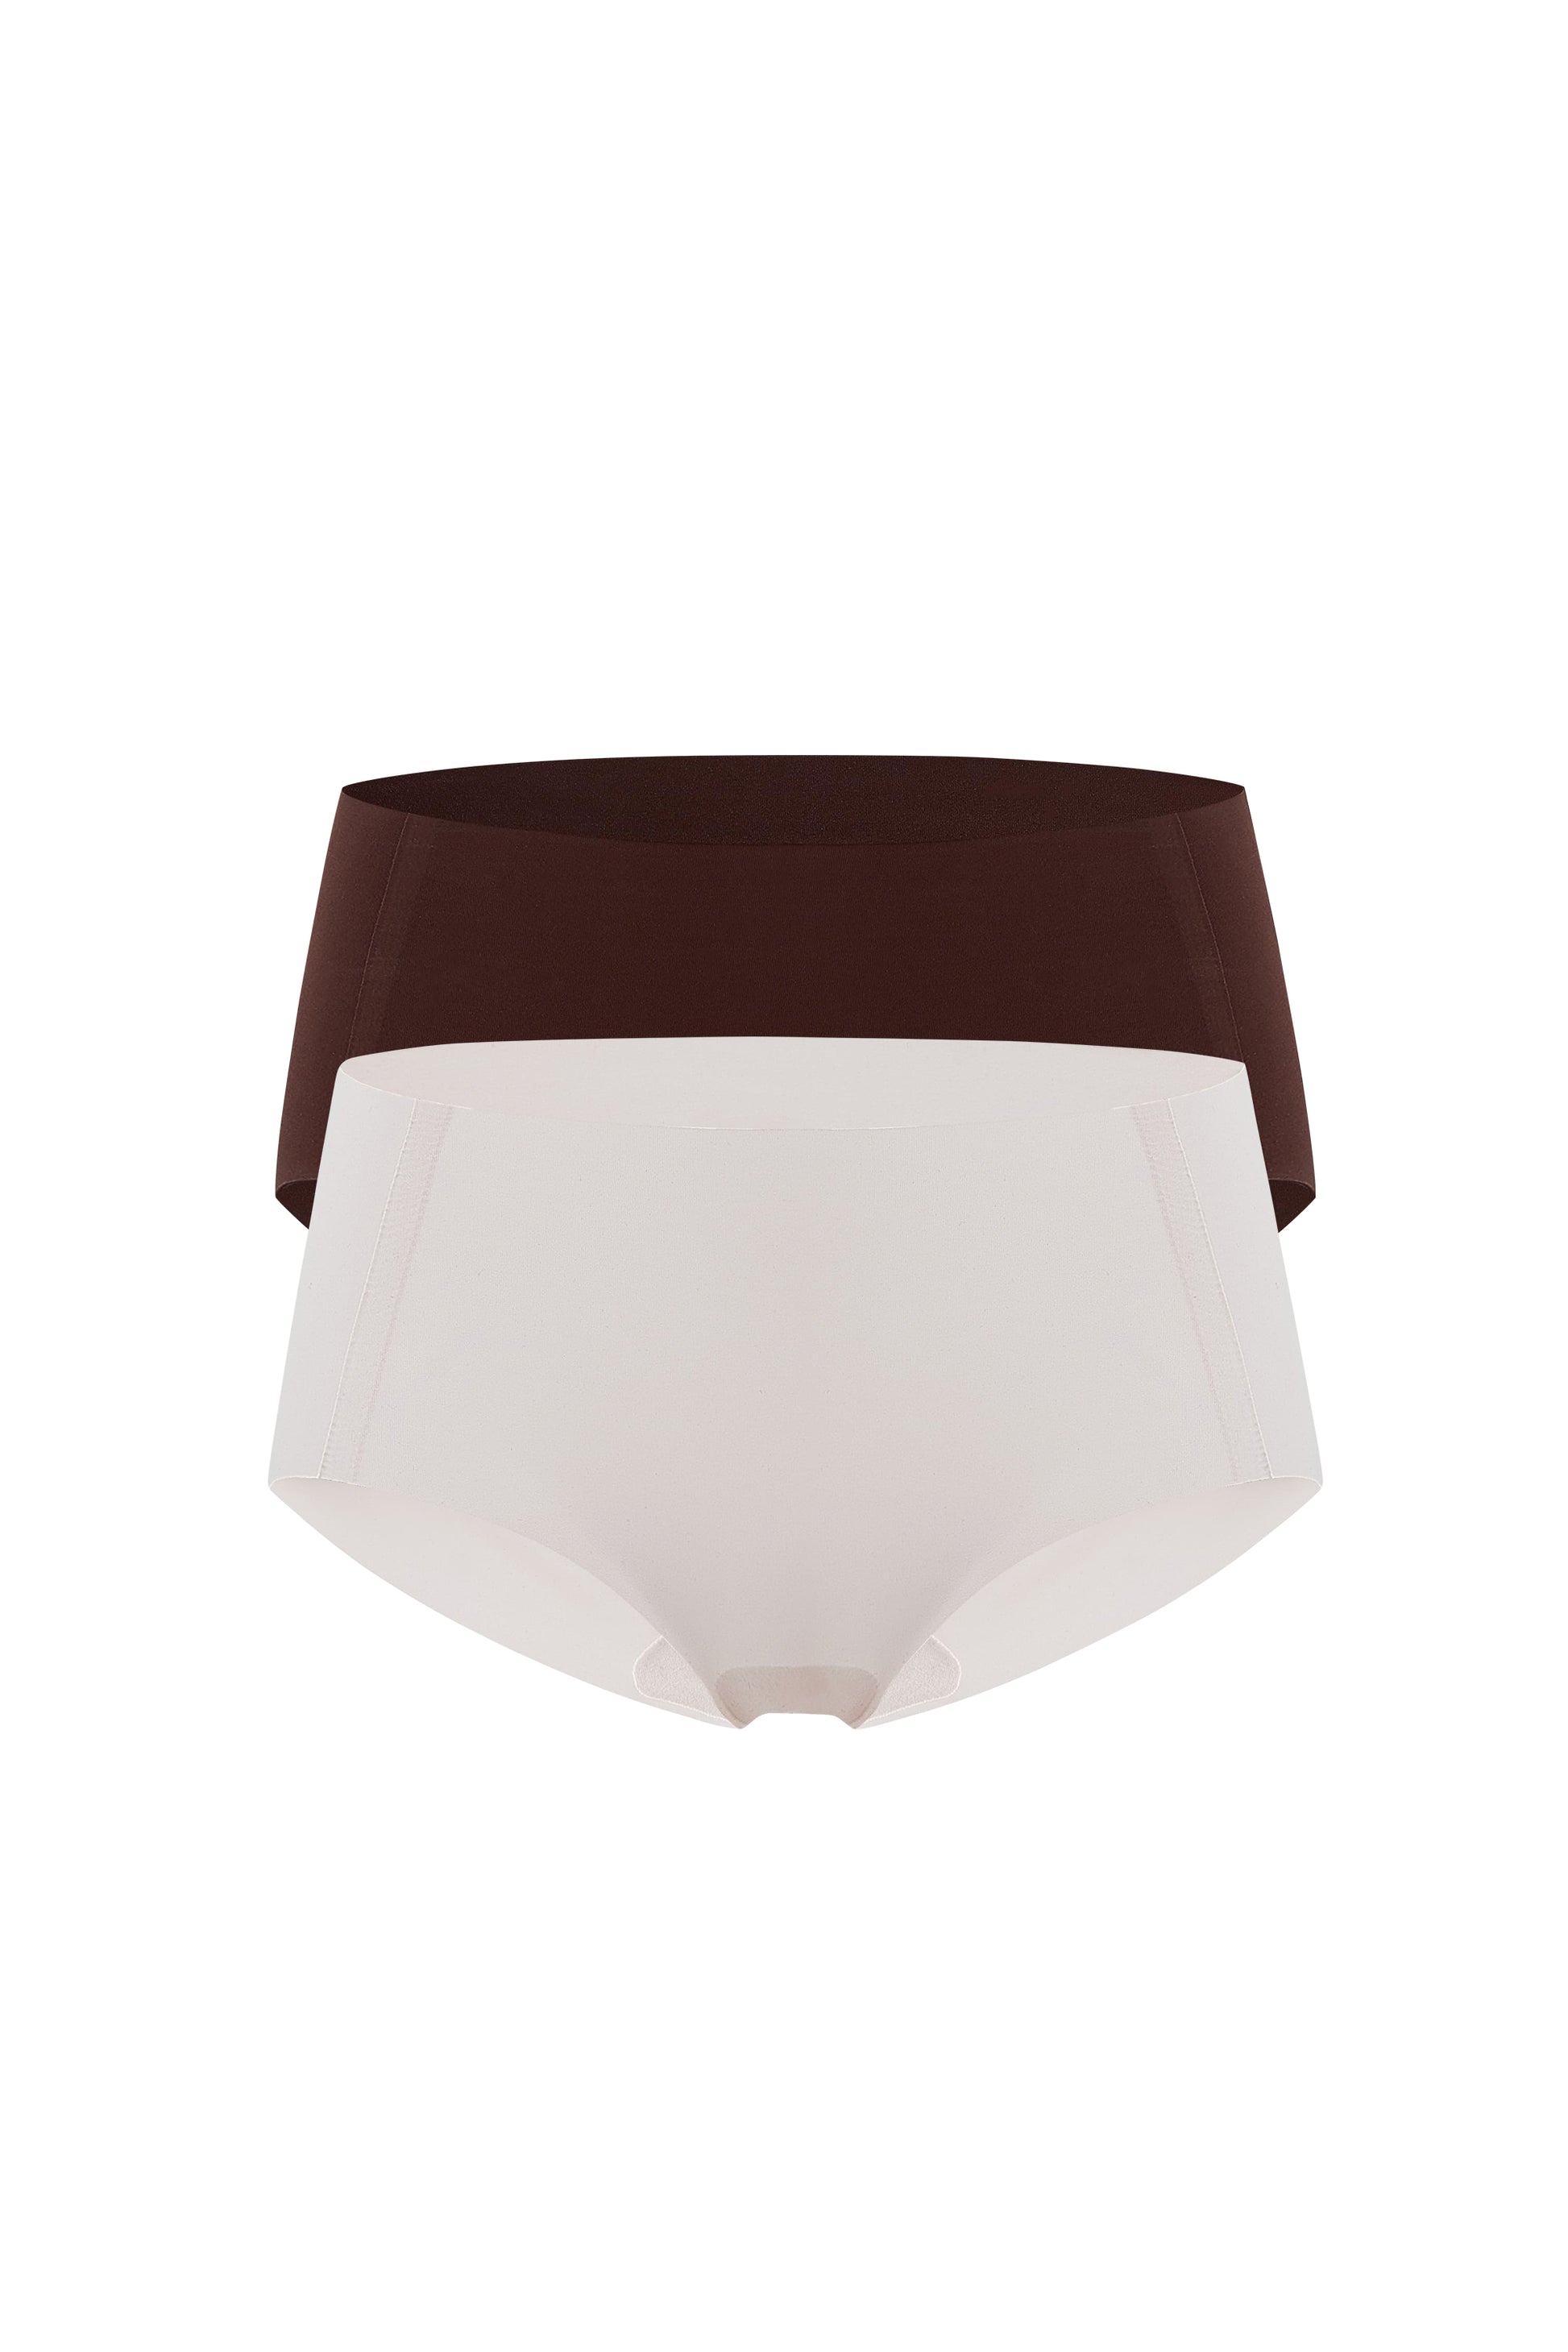 Flay lay images of white and brown underwear briefs